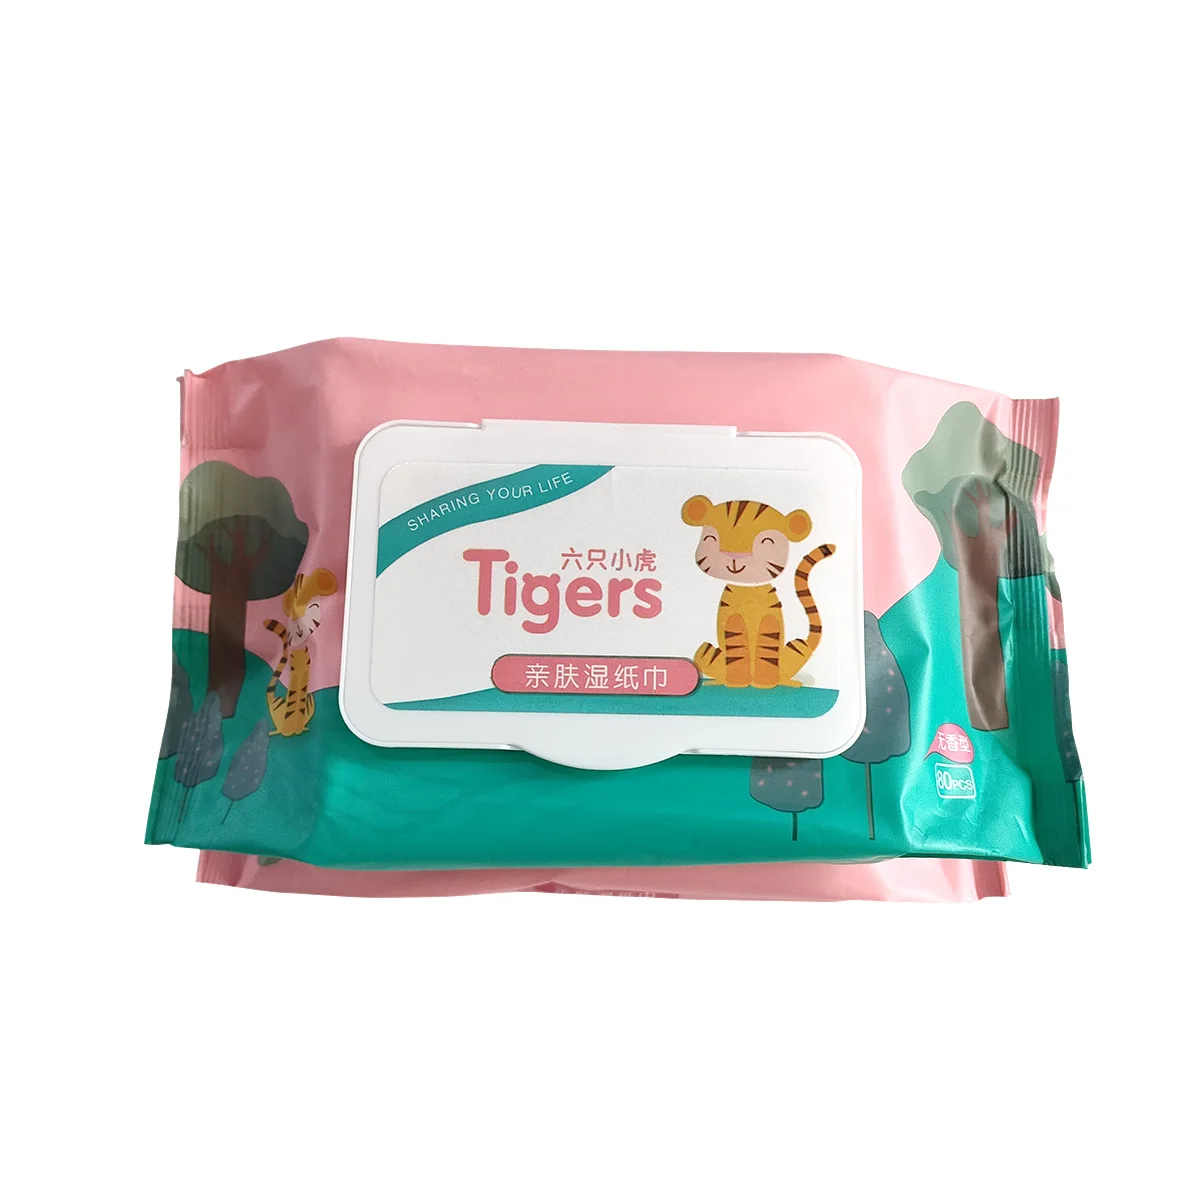 Hot sale cleaning tissue paper economic biodegradable baby tender baby wipes  Coconut Oil Spunlace Cute Baby Cleaning Wet Wipes